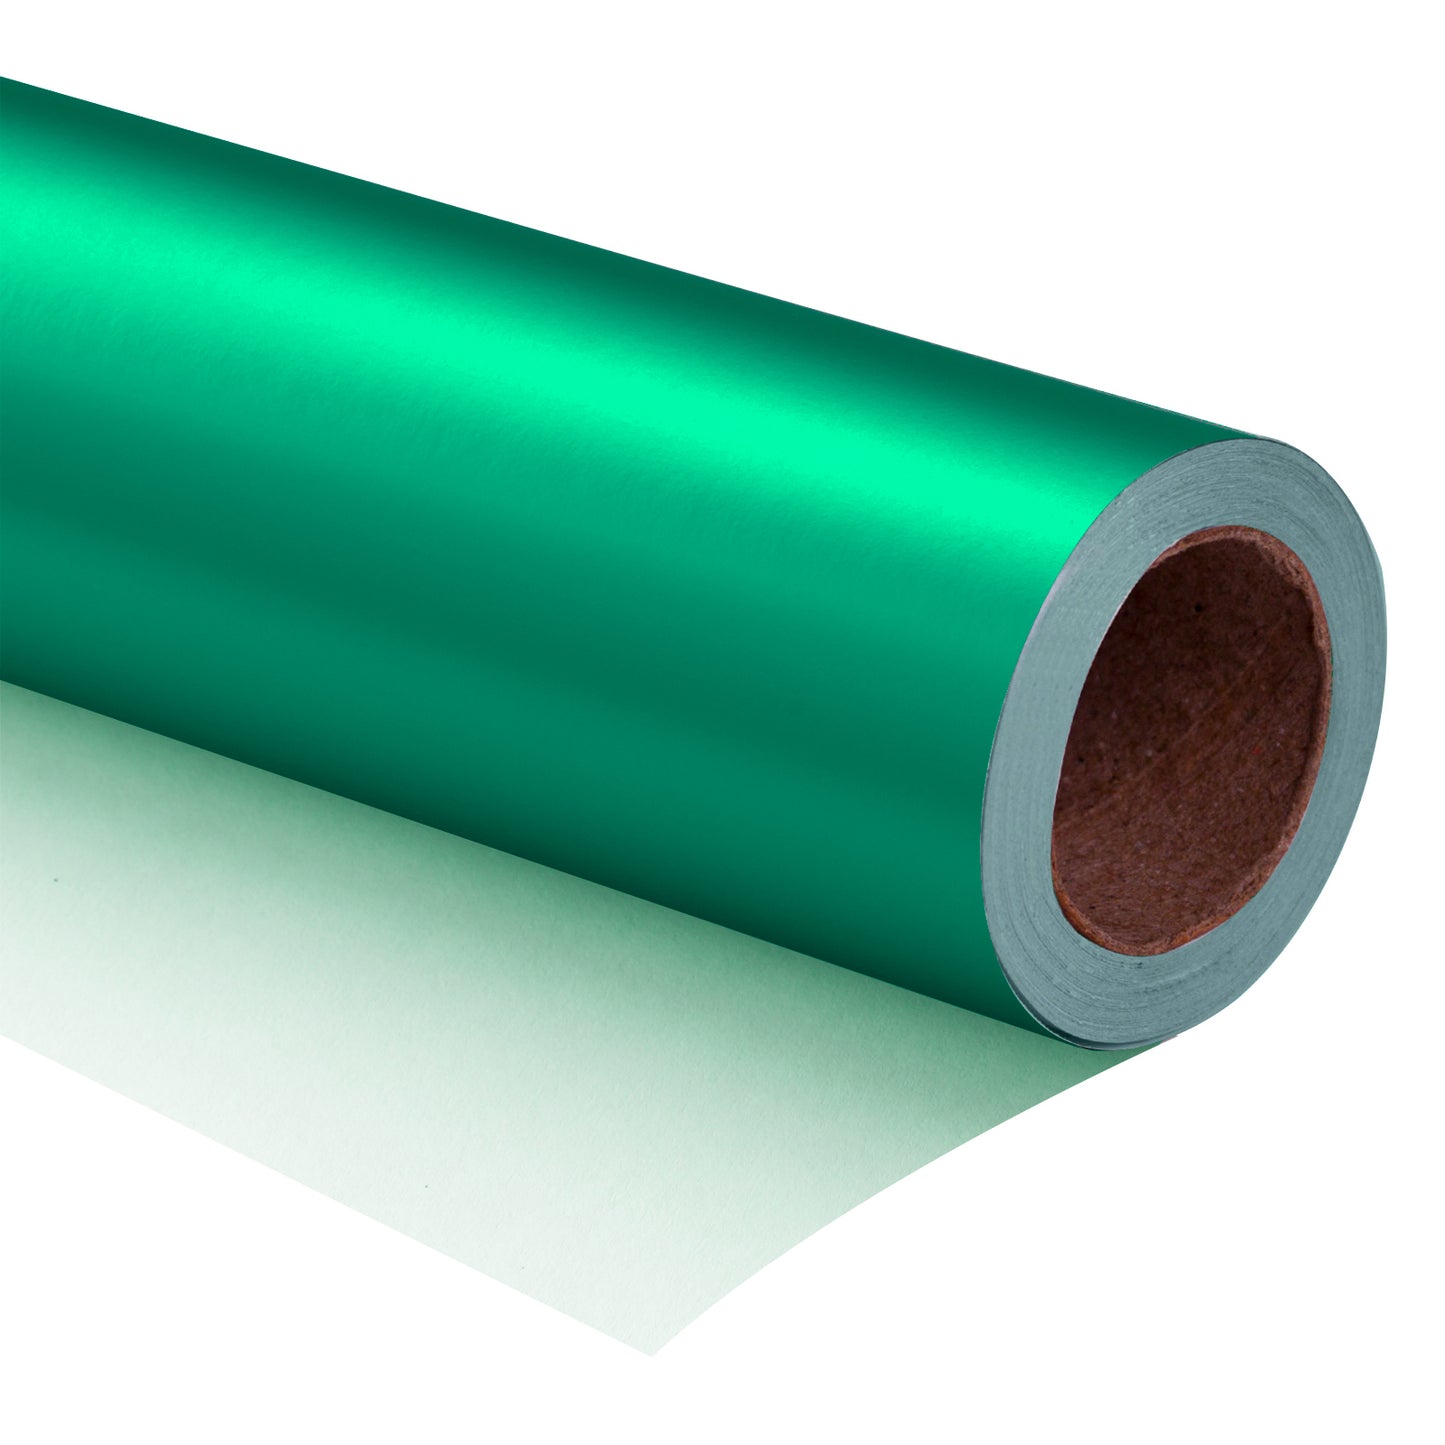 Matte Metallic Wrapping Paper Roll Green Ream Wholesale Wrapaholic